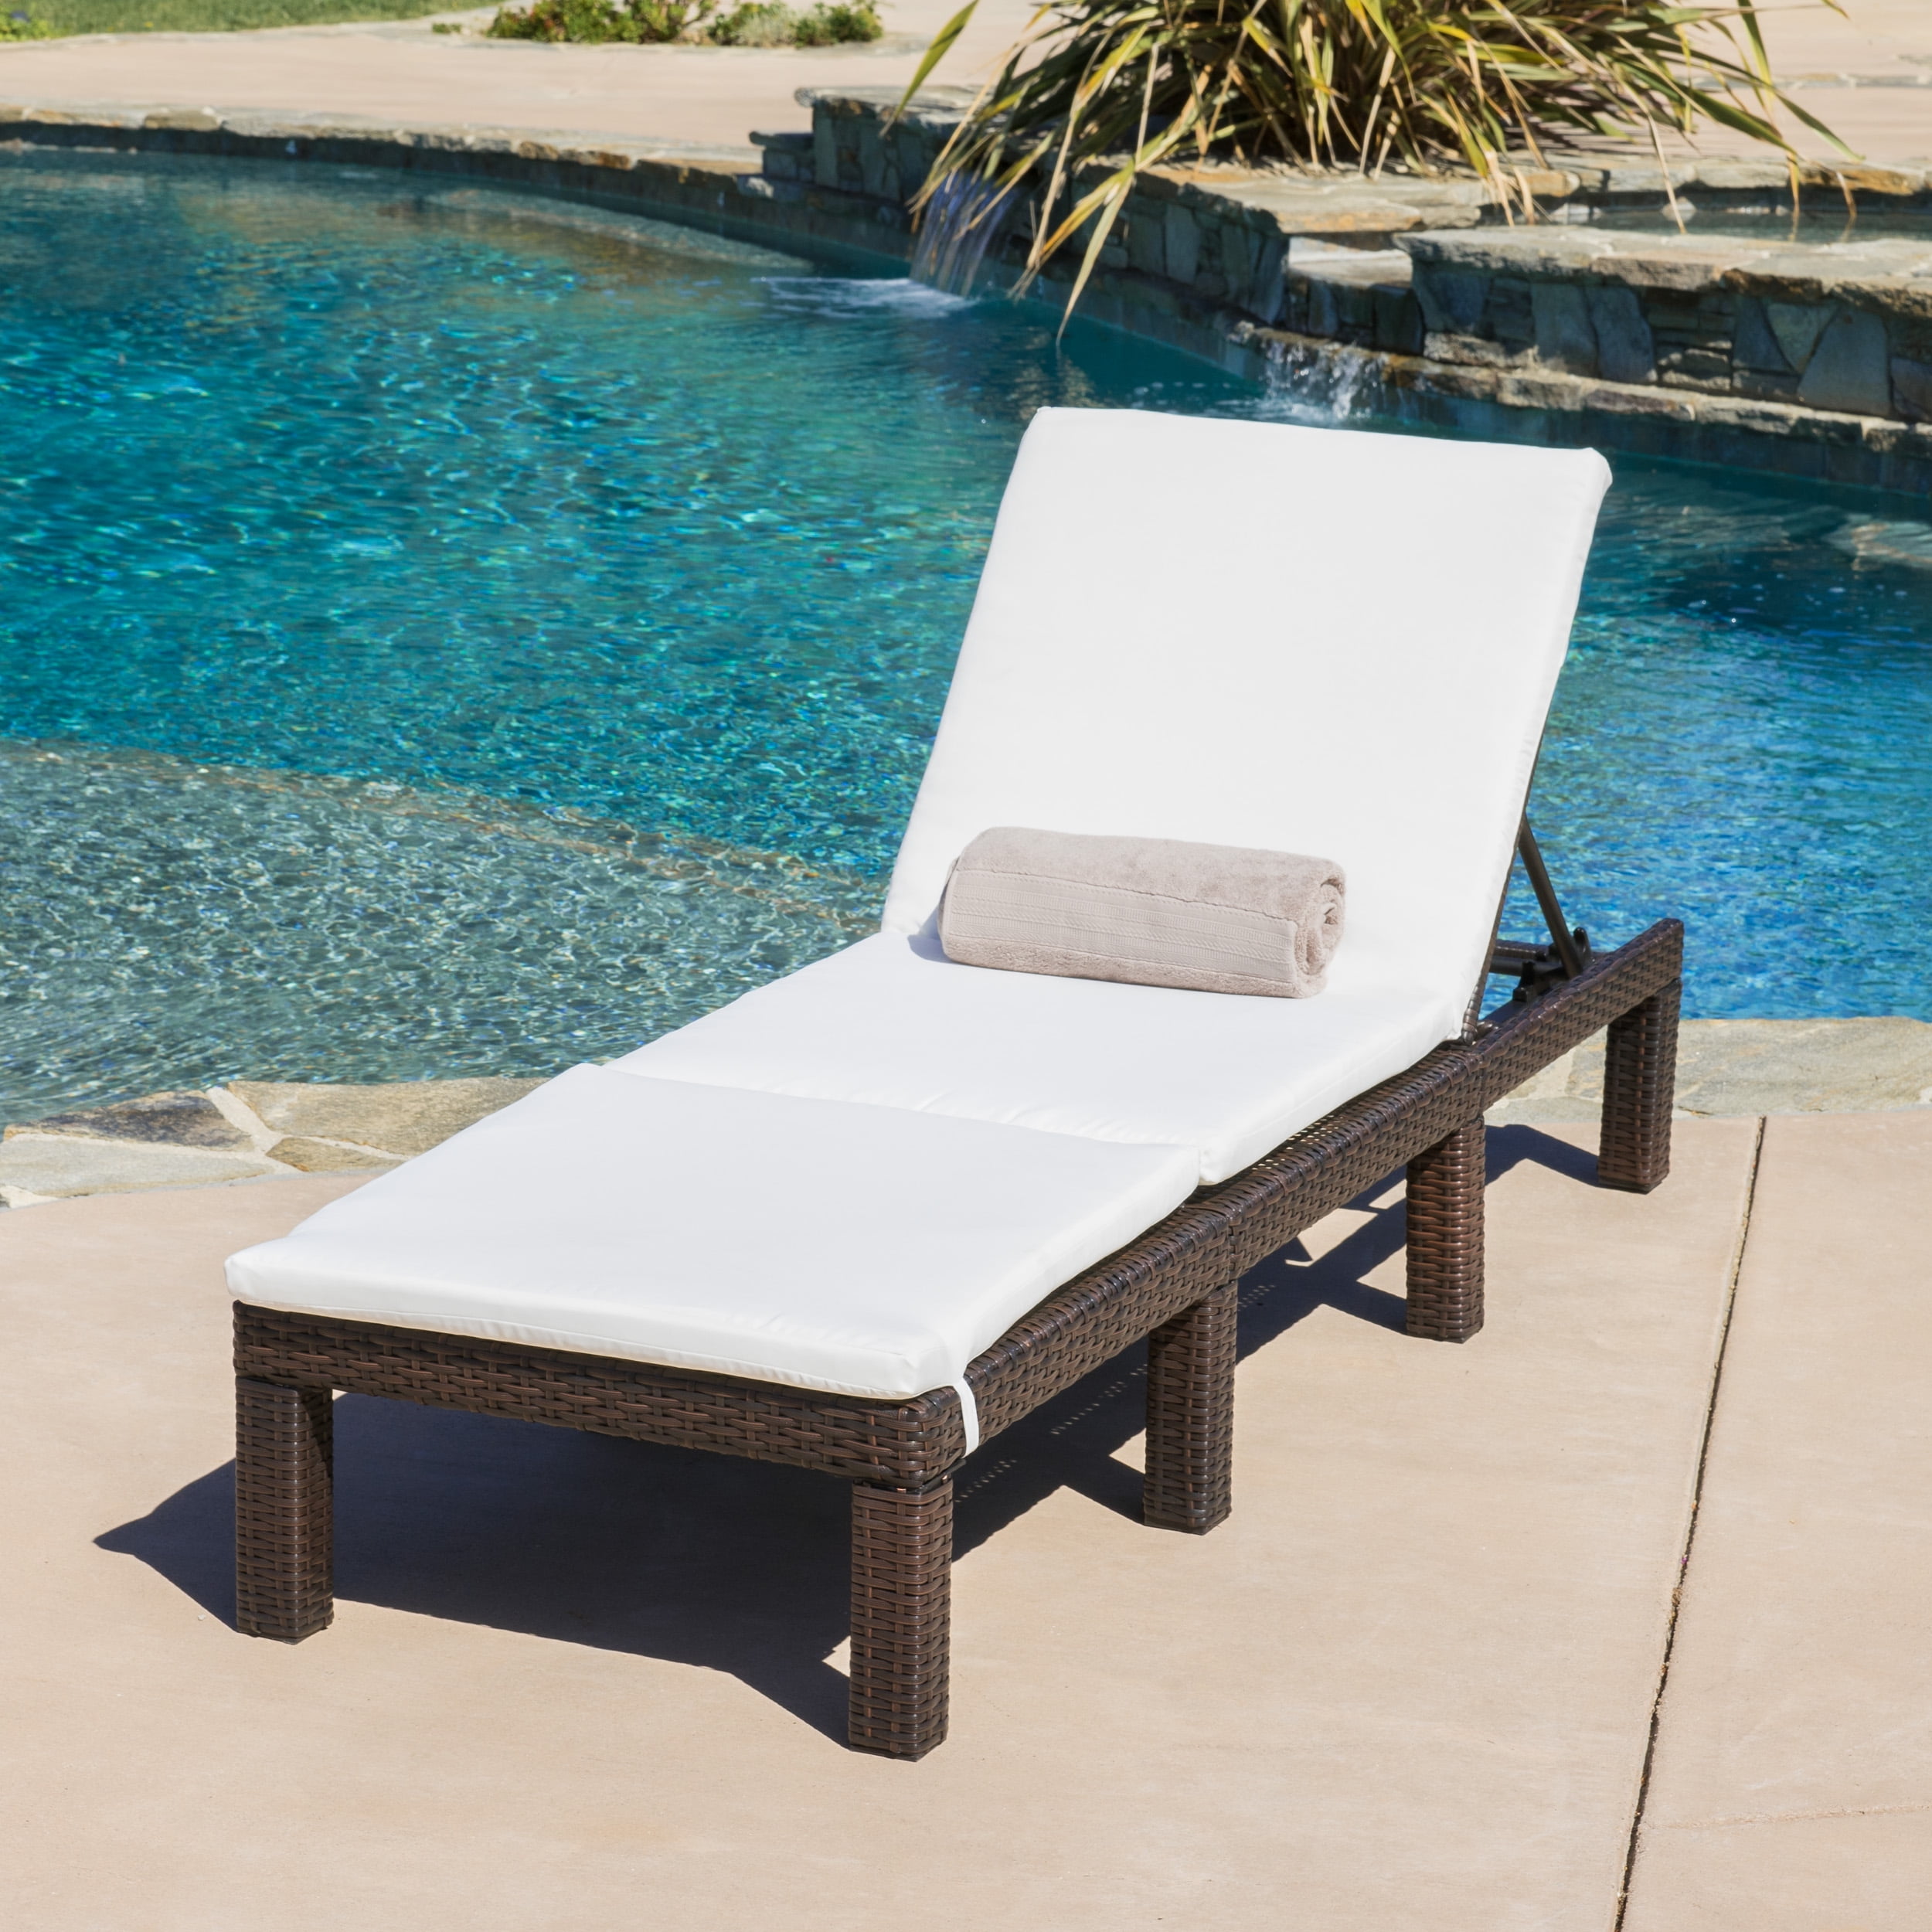 Aspen Outdoor Wicker Adjustable Chaise Lounge Chair with Cushion